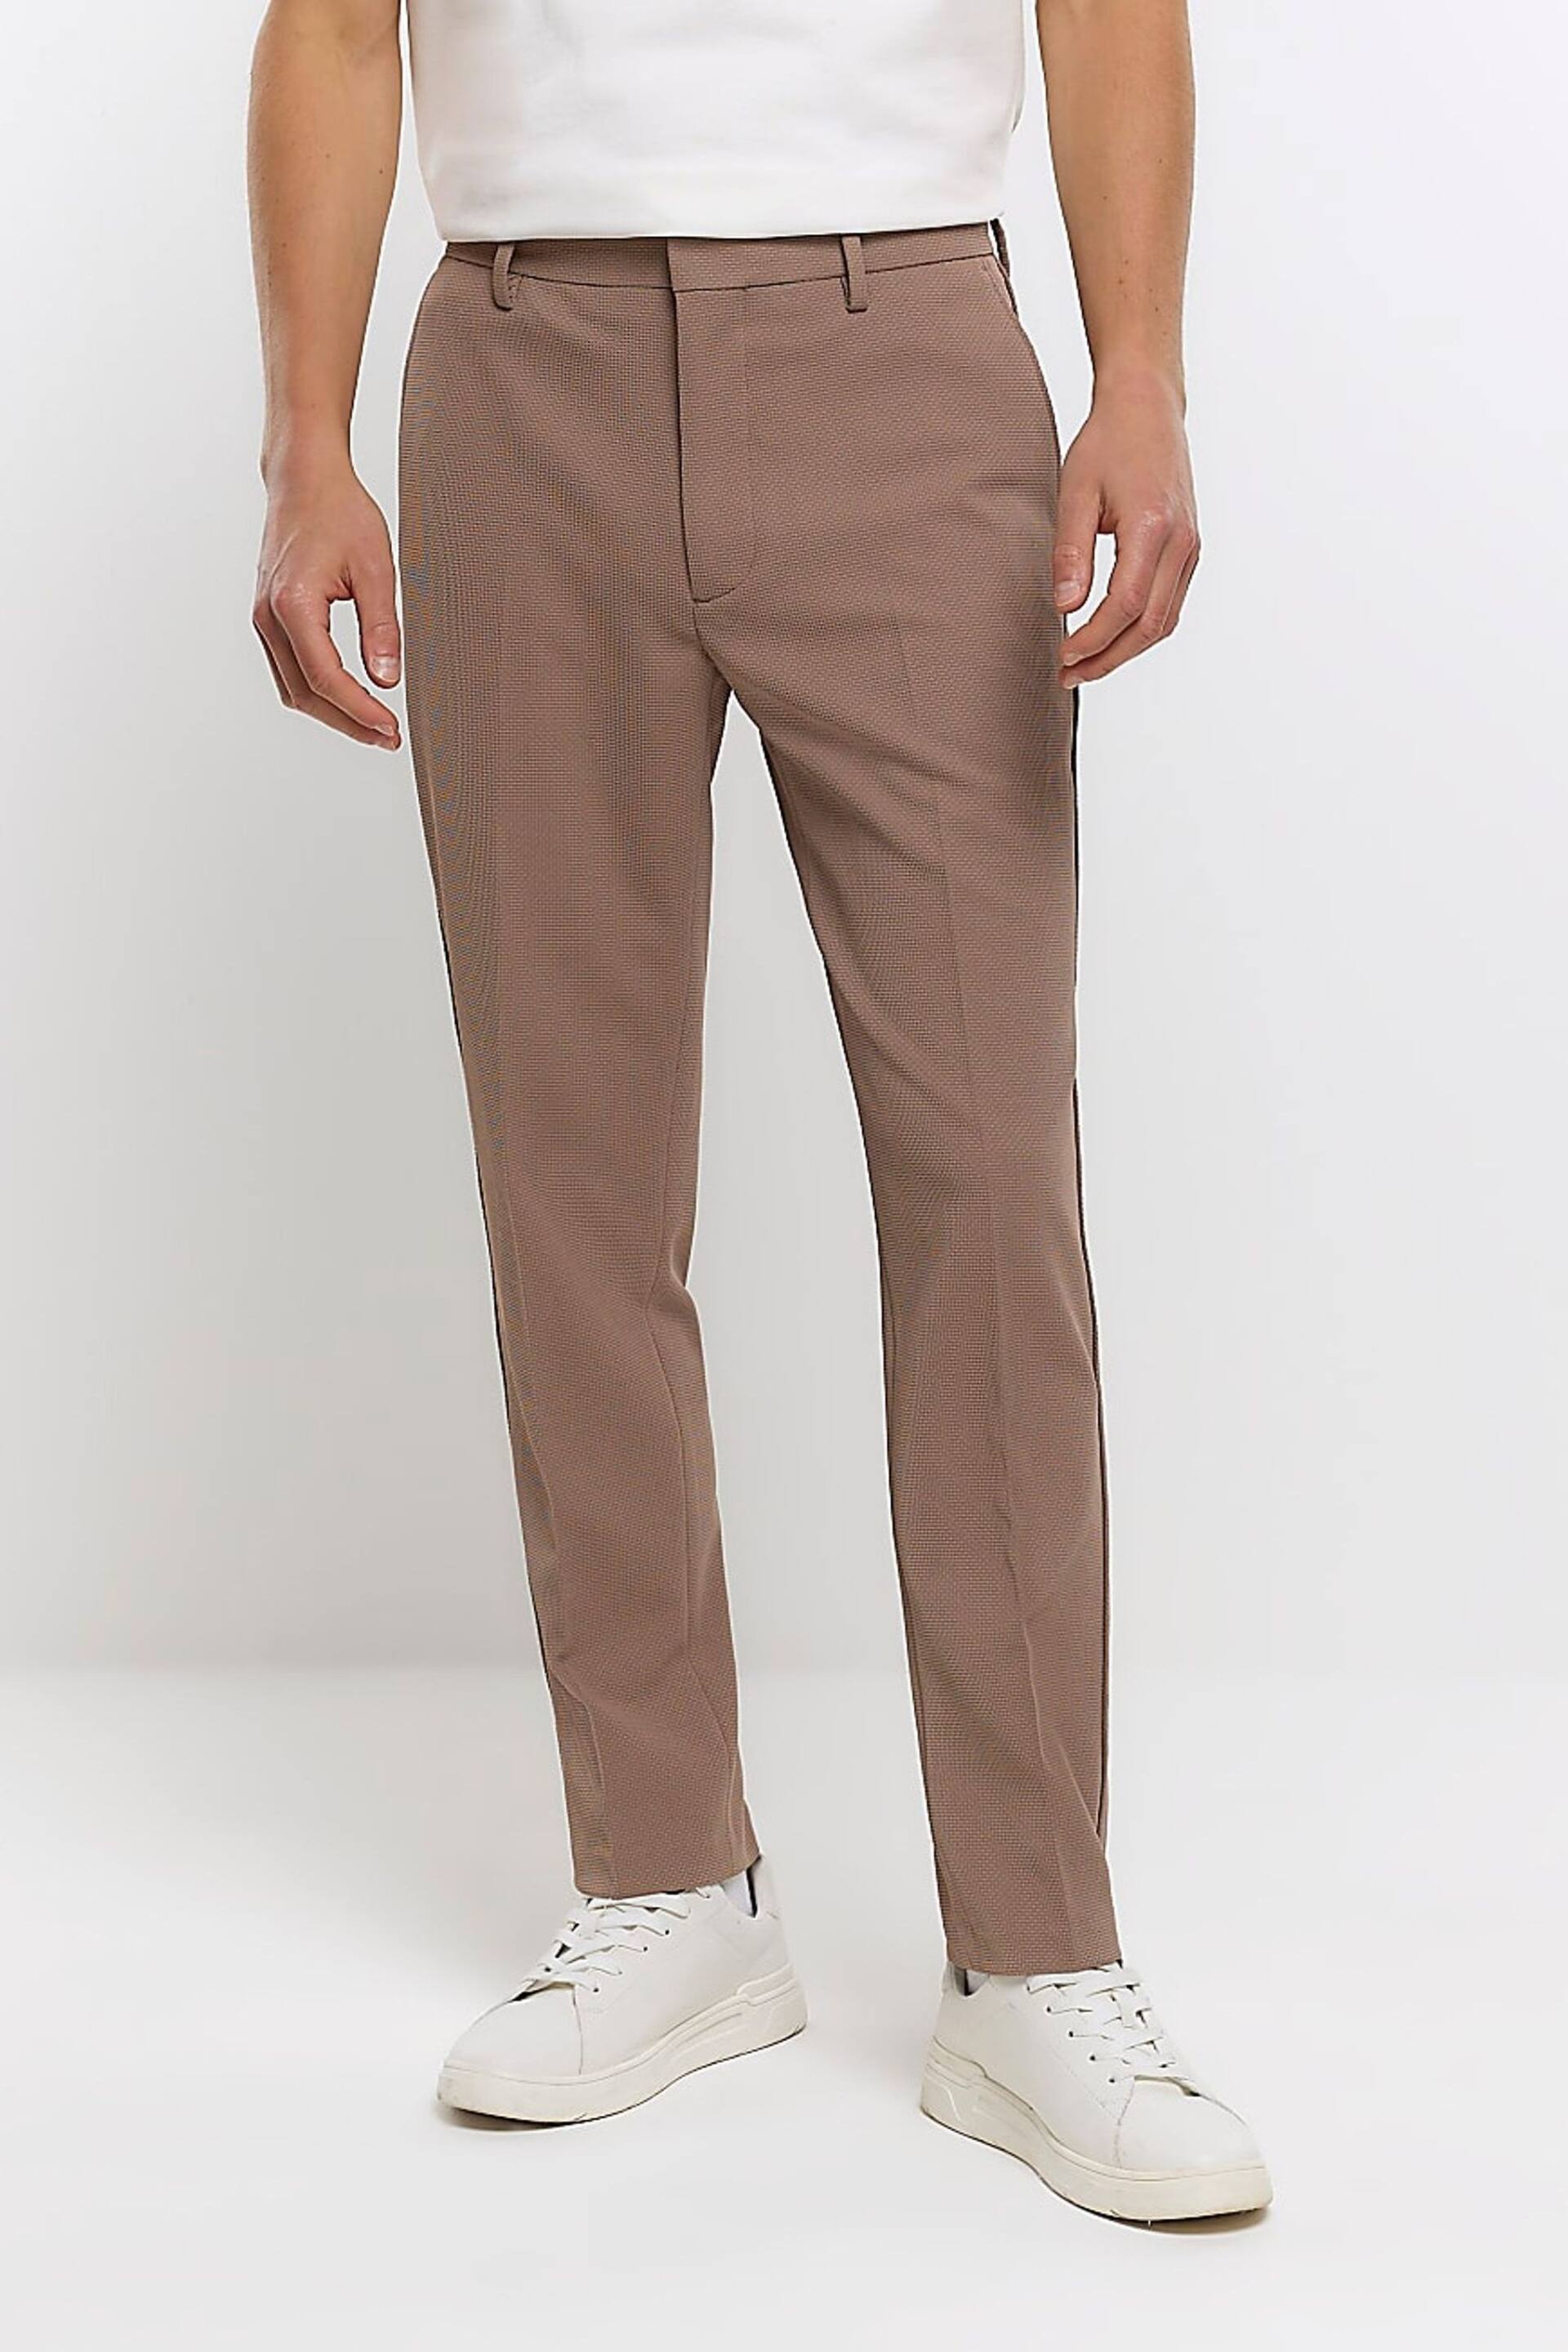 River Island Brown Waffle Smart Trousers - Image 4 of 6